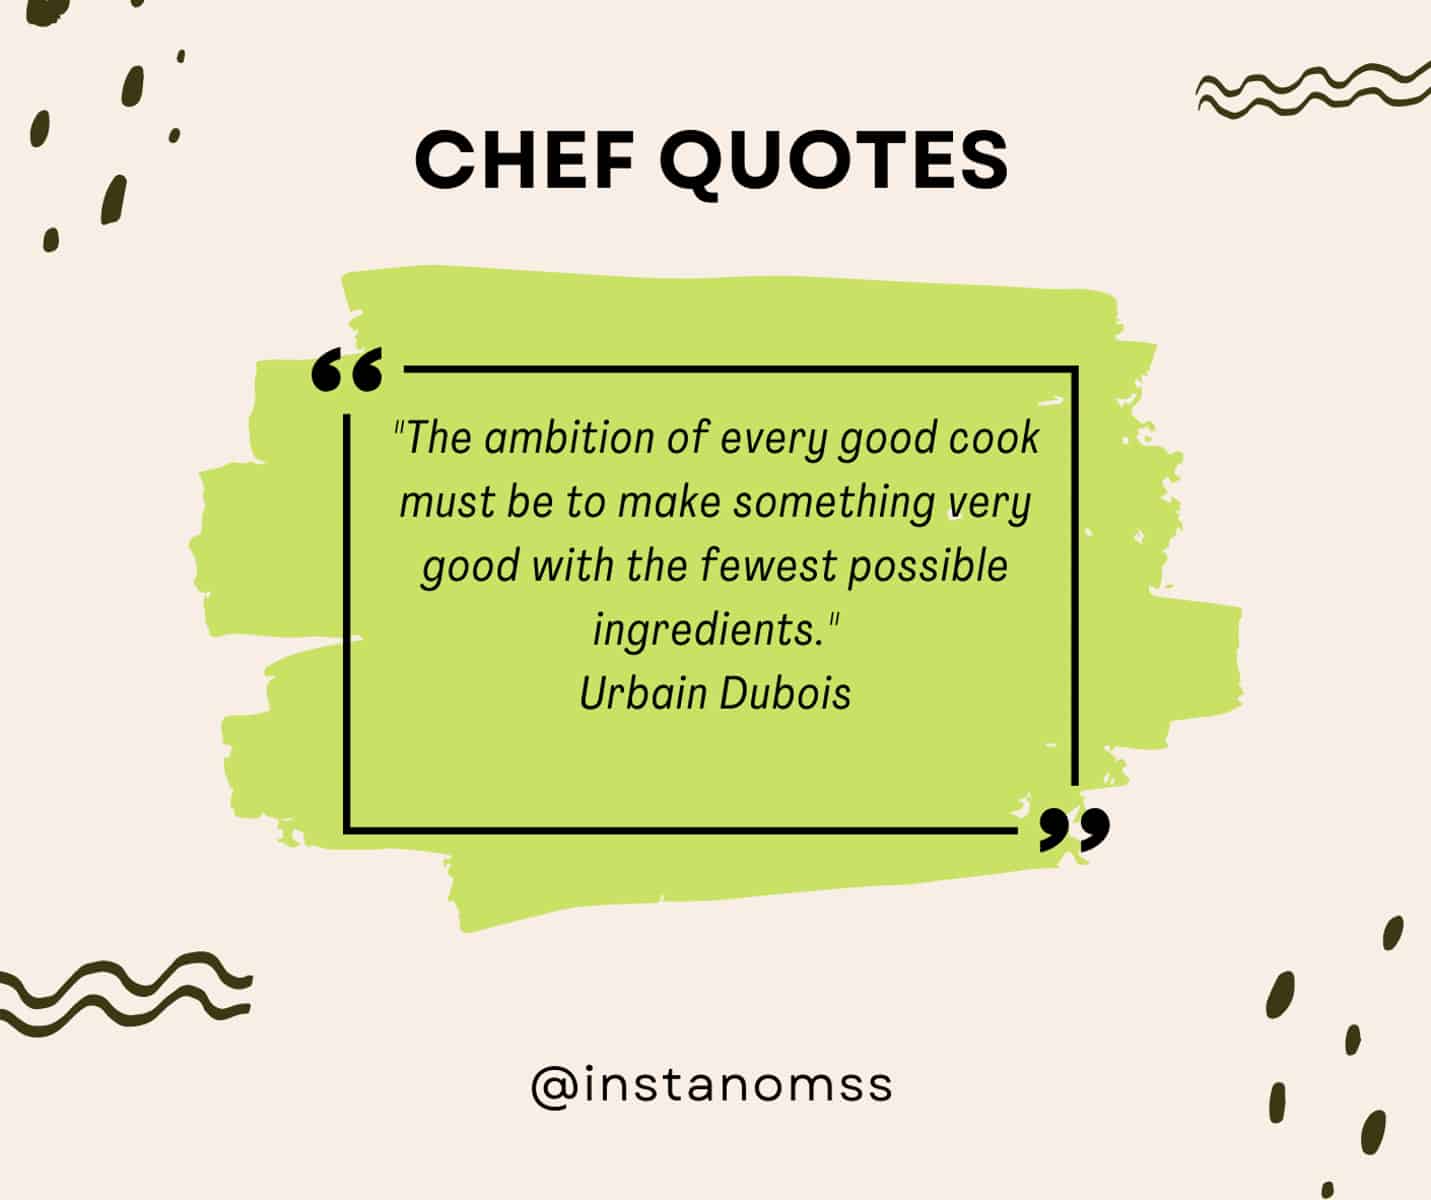 "The ambition of every good cook must be to make something very good with the fewest possible ingredients." Urbain Dubois